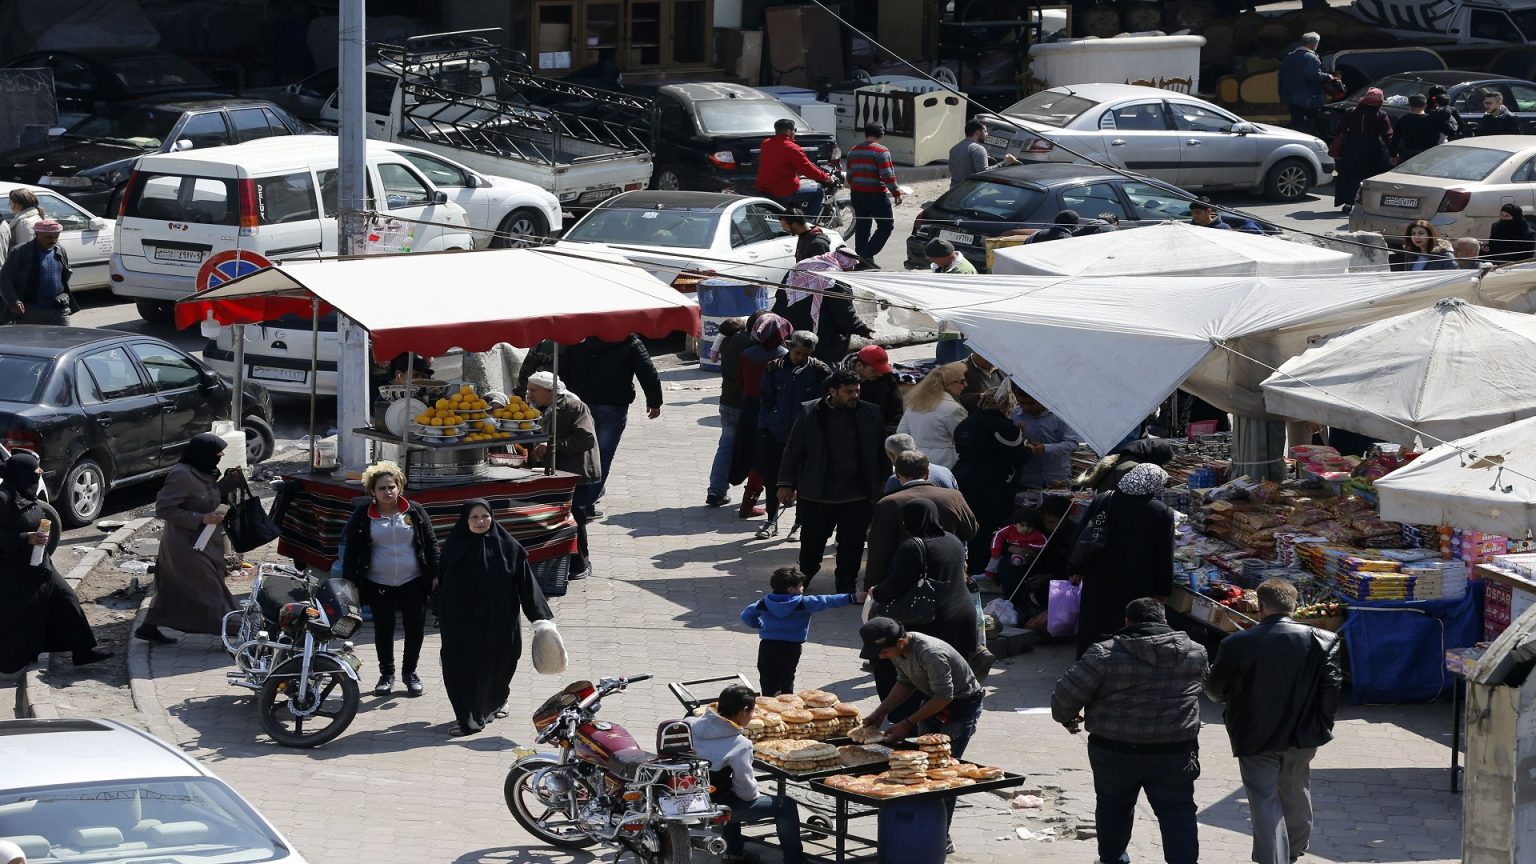 Low-income employees in Syria